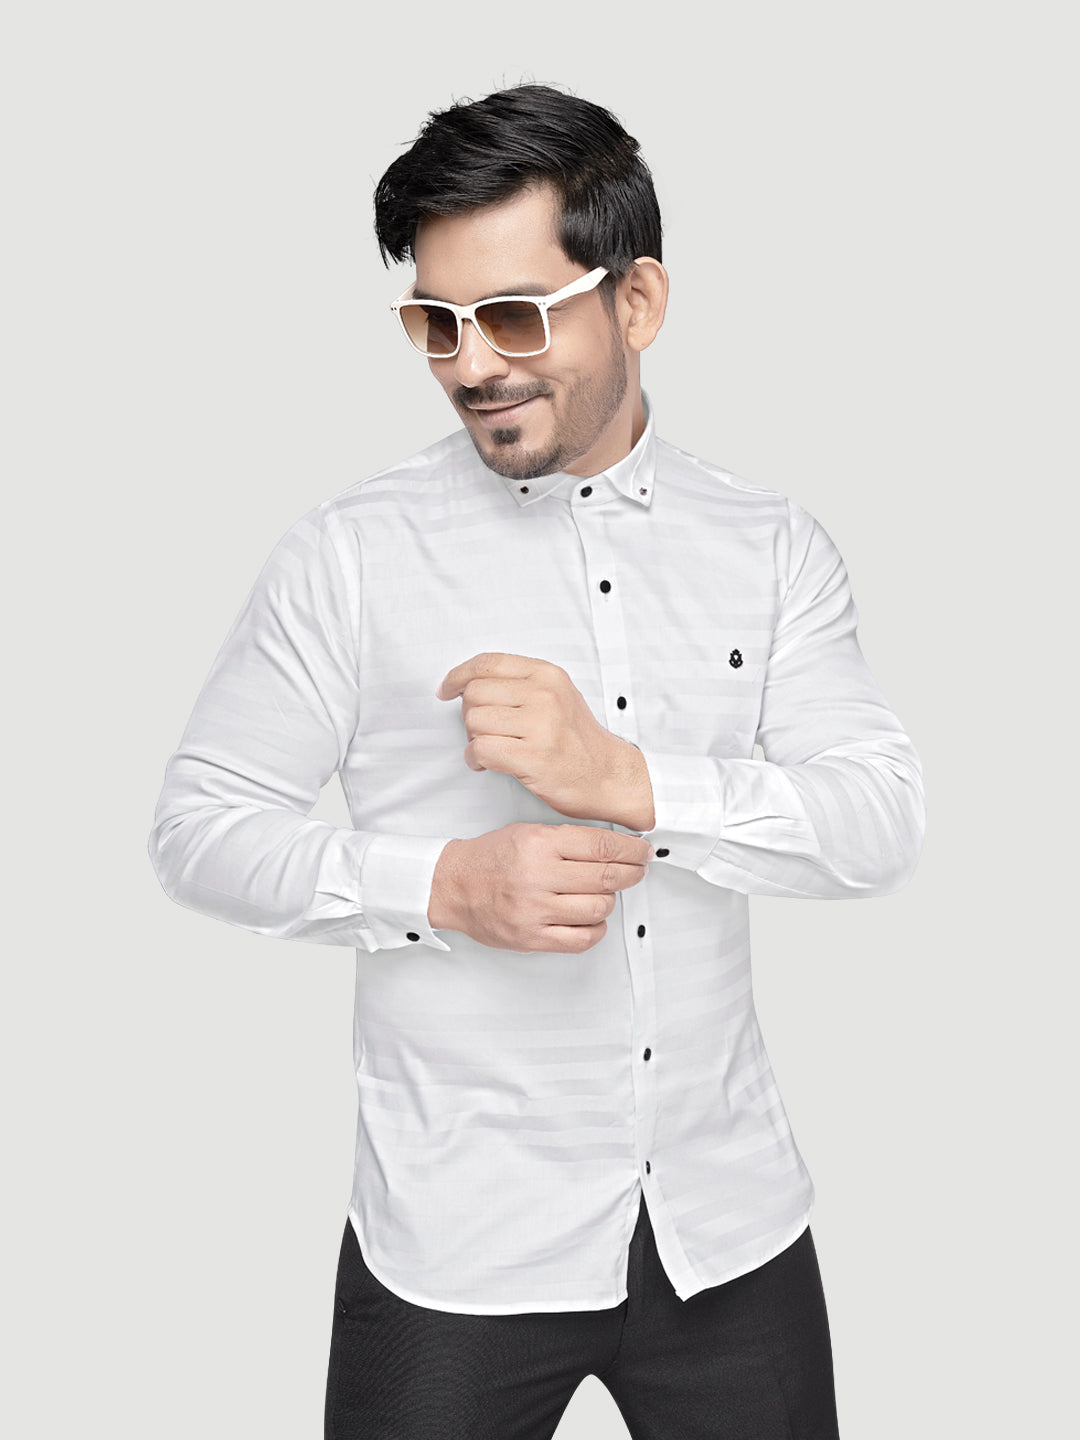 Black and White Shirts Men's Designer Weft Shirt with Collar Accessory-1